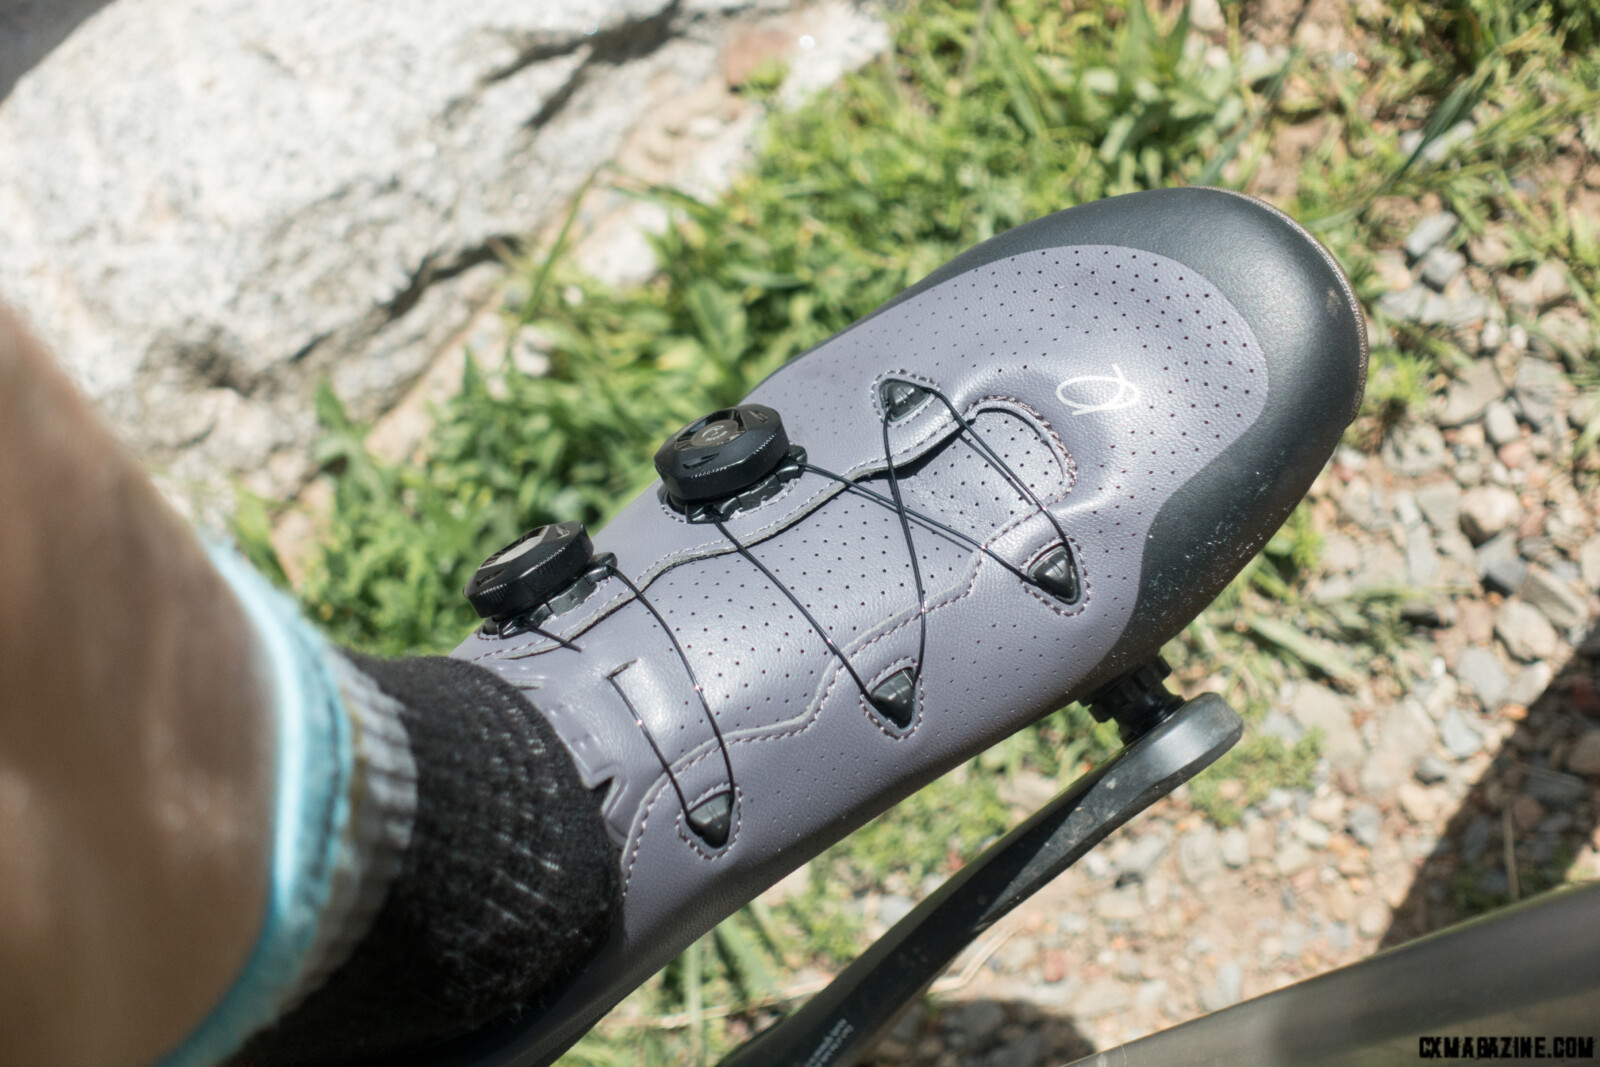 Quoc Grand Tourer XC / Cyclocross / Gravel Shoes Reviewed